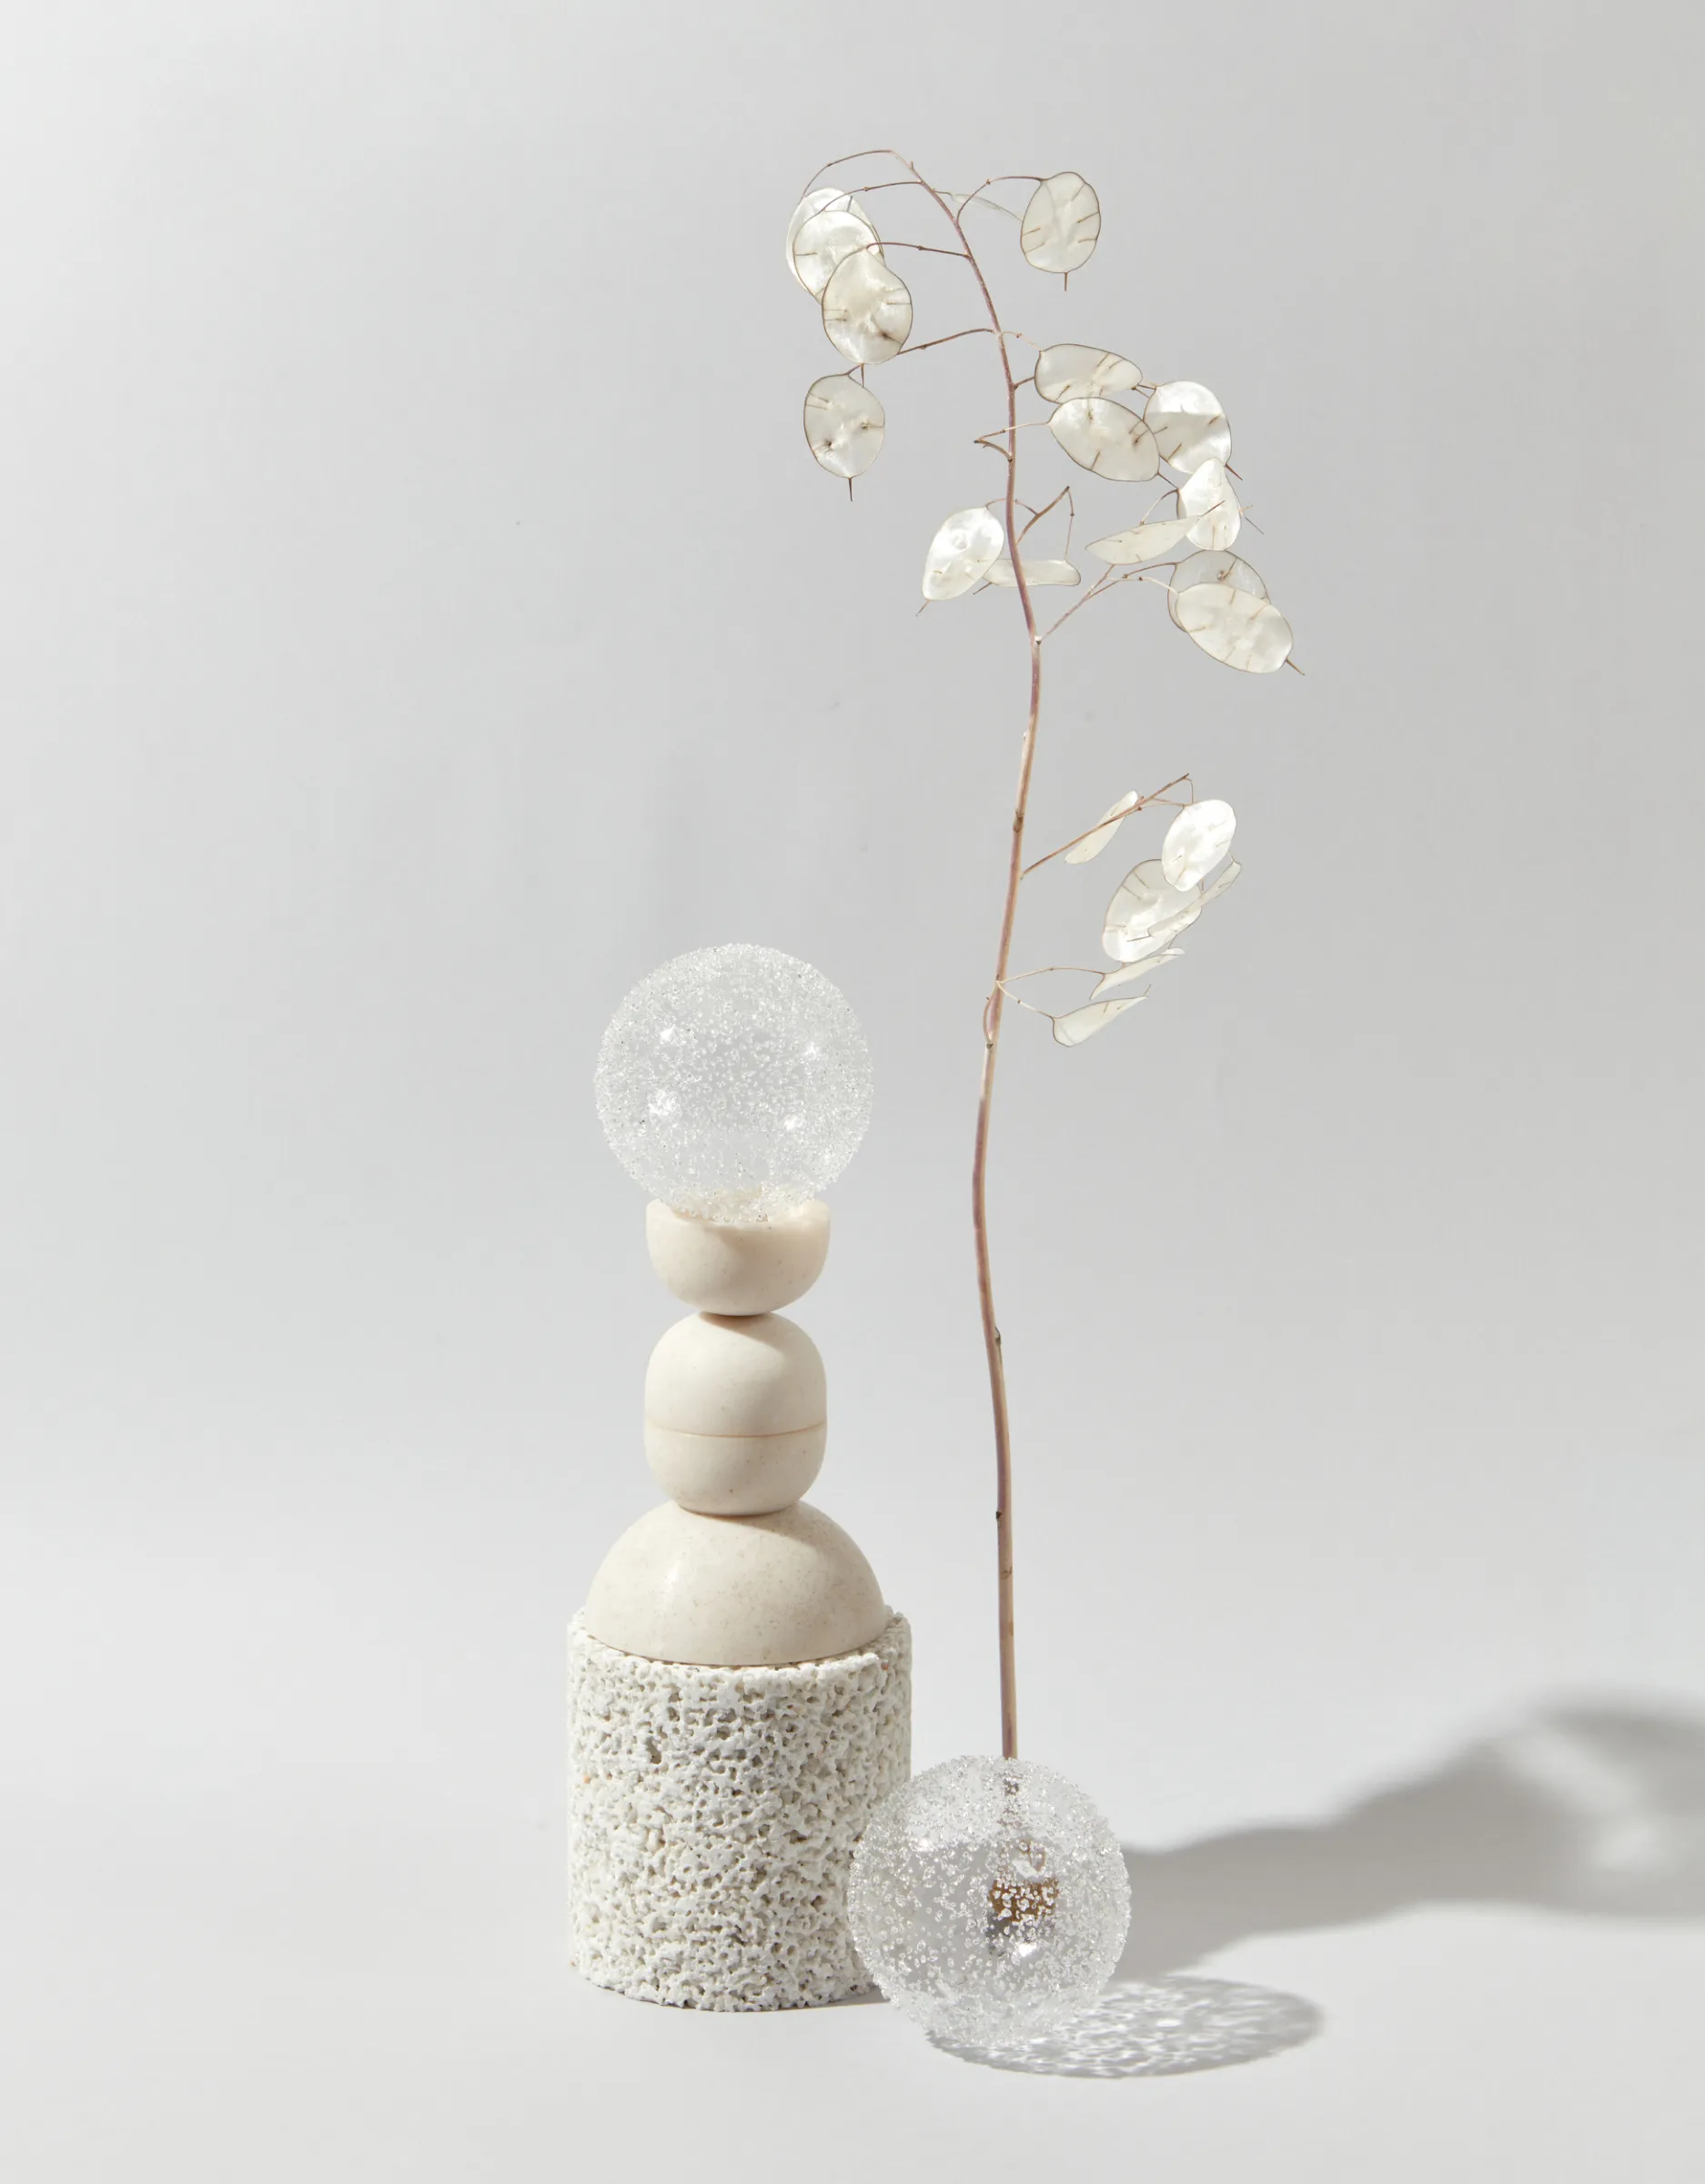 A composition of stacked stones and glittering glass spheres with a delicate dried plant on a shadowed background.